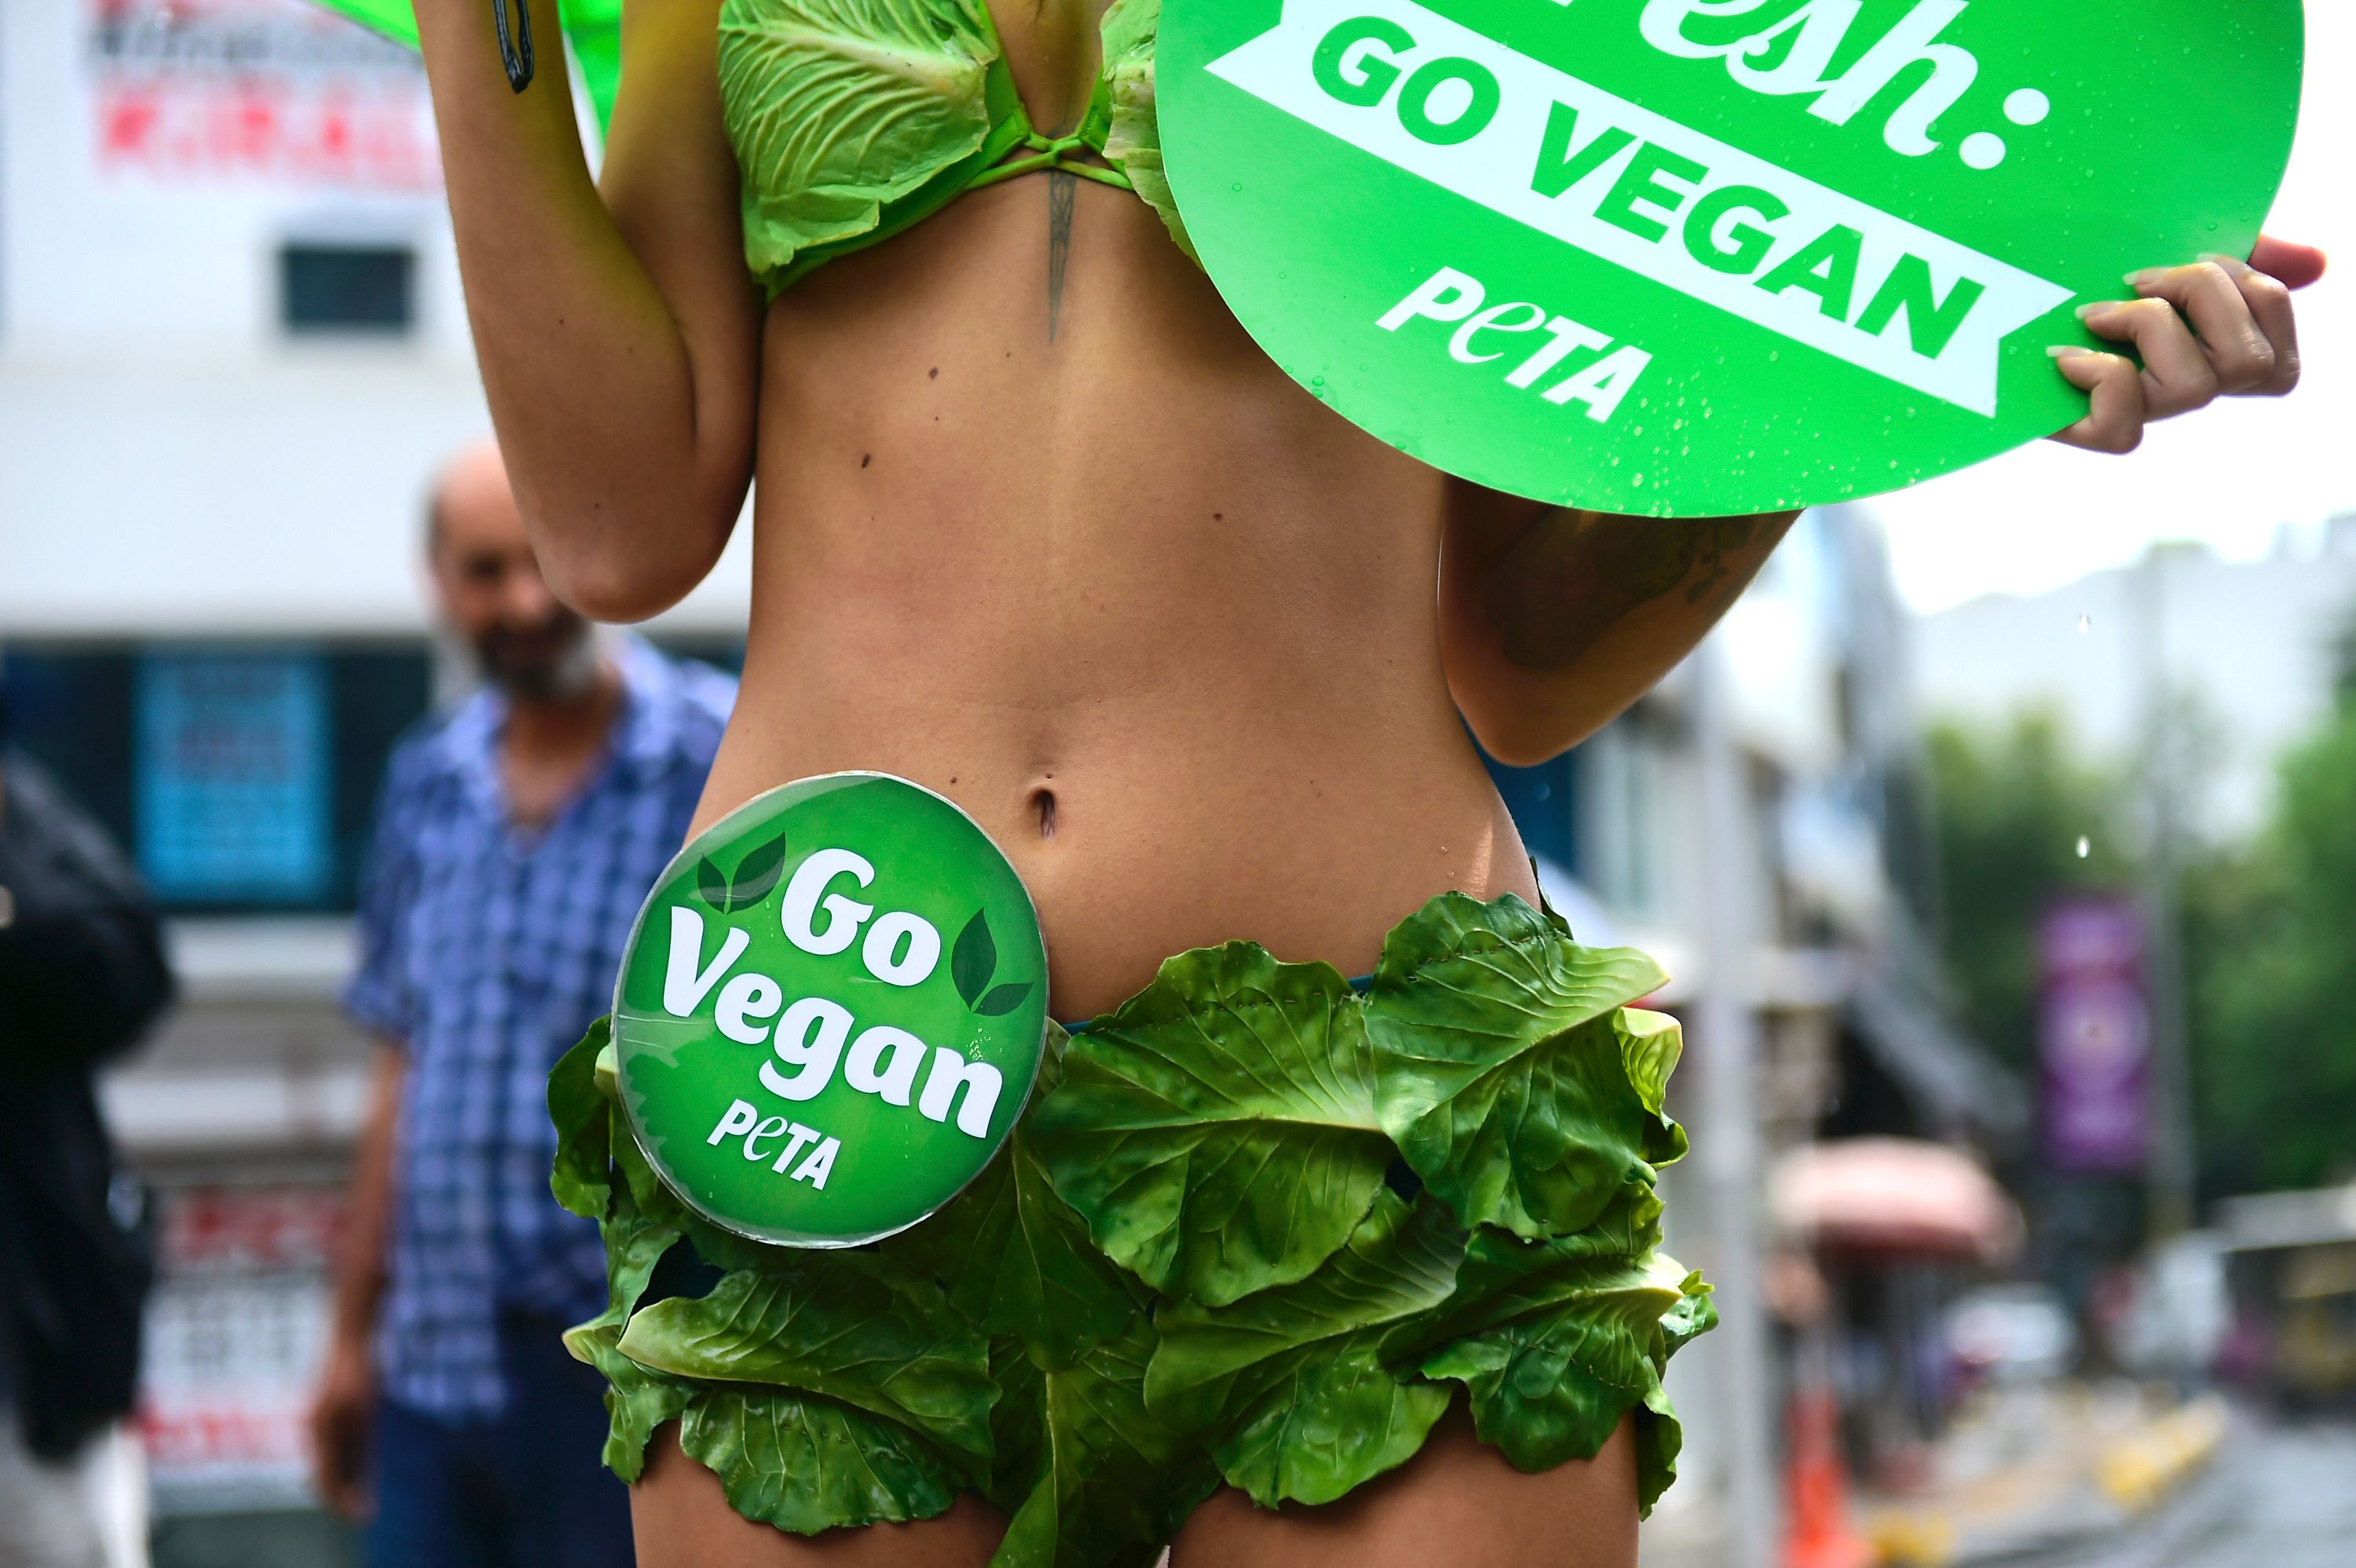 A woman wearing underwear made with salad and called "Lettuce Ladies", holds a placard reading ''start fresh, go vegan" during a demonstration of the US animal rights organisation People for the Ethical Treatment of Animals (PETA), next to a bull scultpure on August 17, 2017, at Kadikoy, in Istanbul. / AFP PHOTO / YASIN AKGUL (Photo credit should read YASIN AKGUL/AFP/Getty Images)